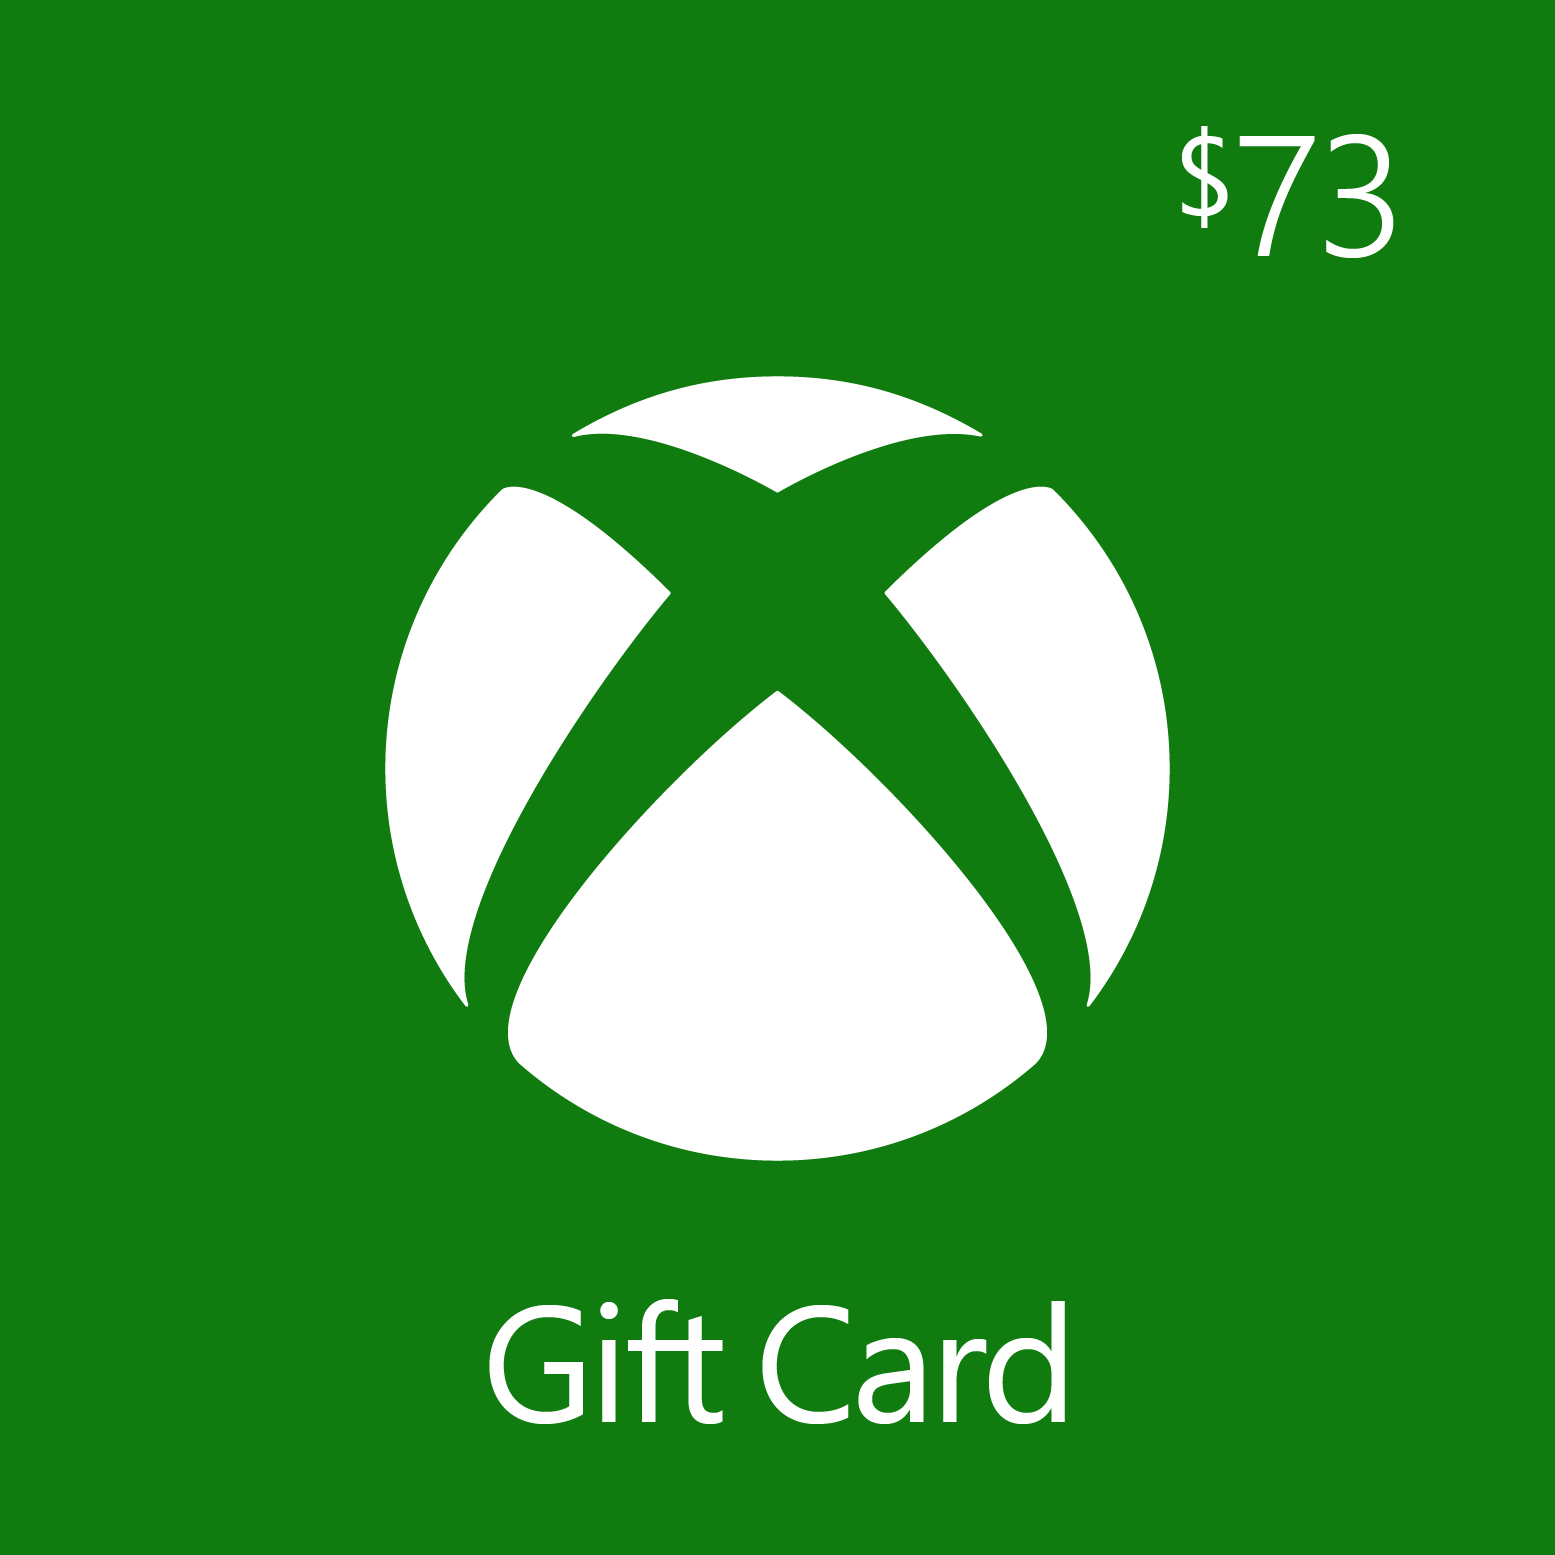 microsoft store gift card discount